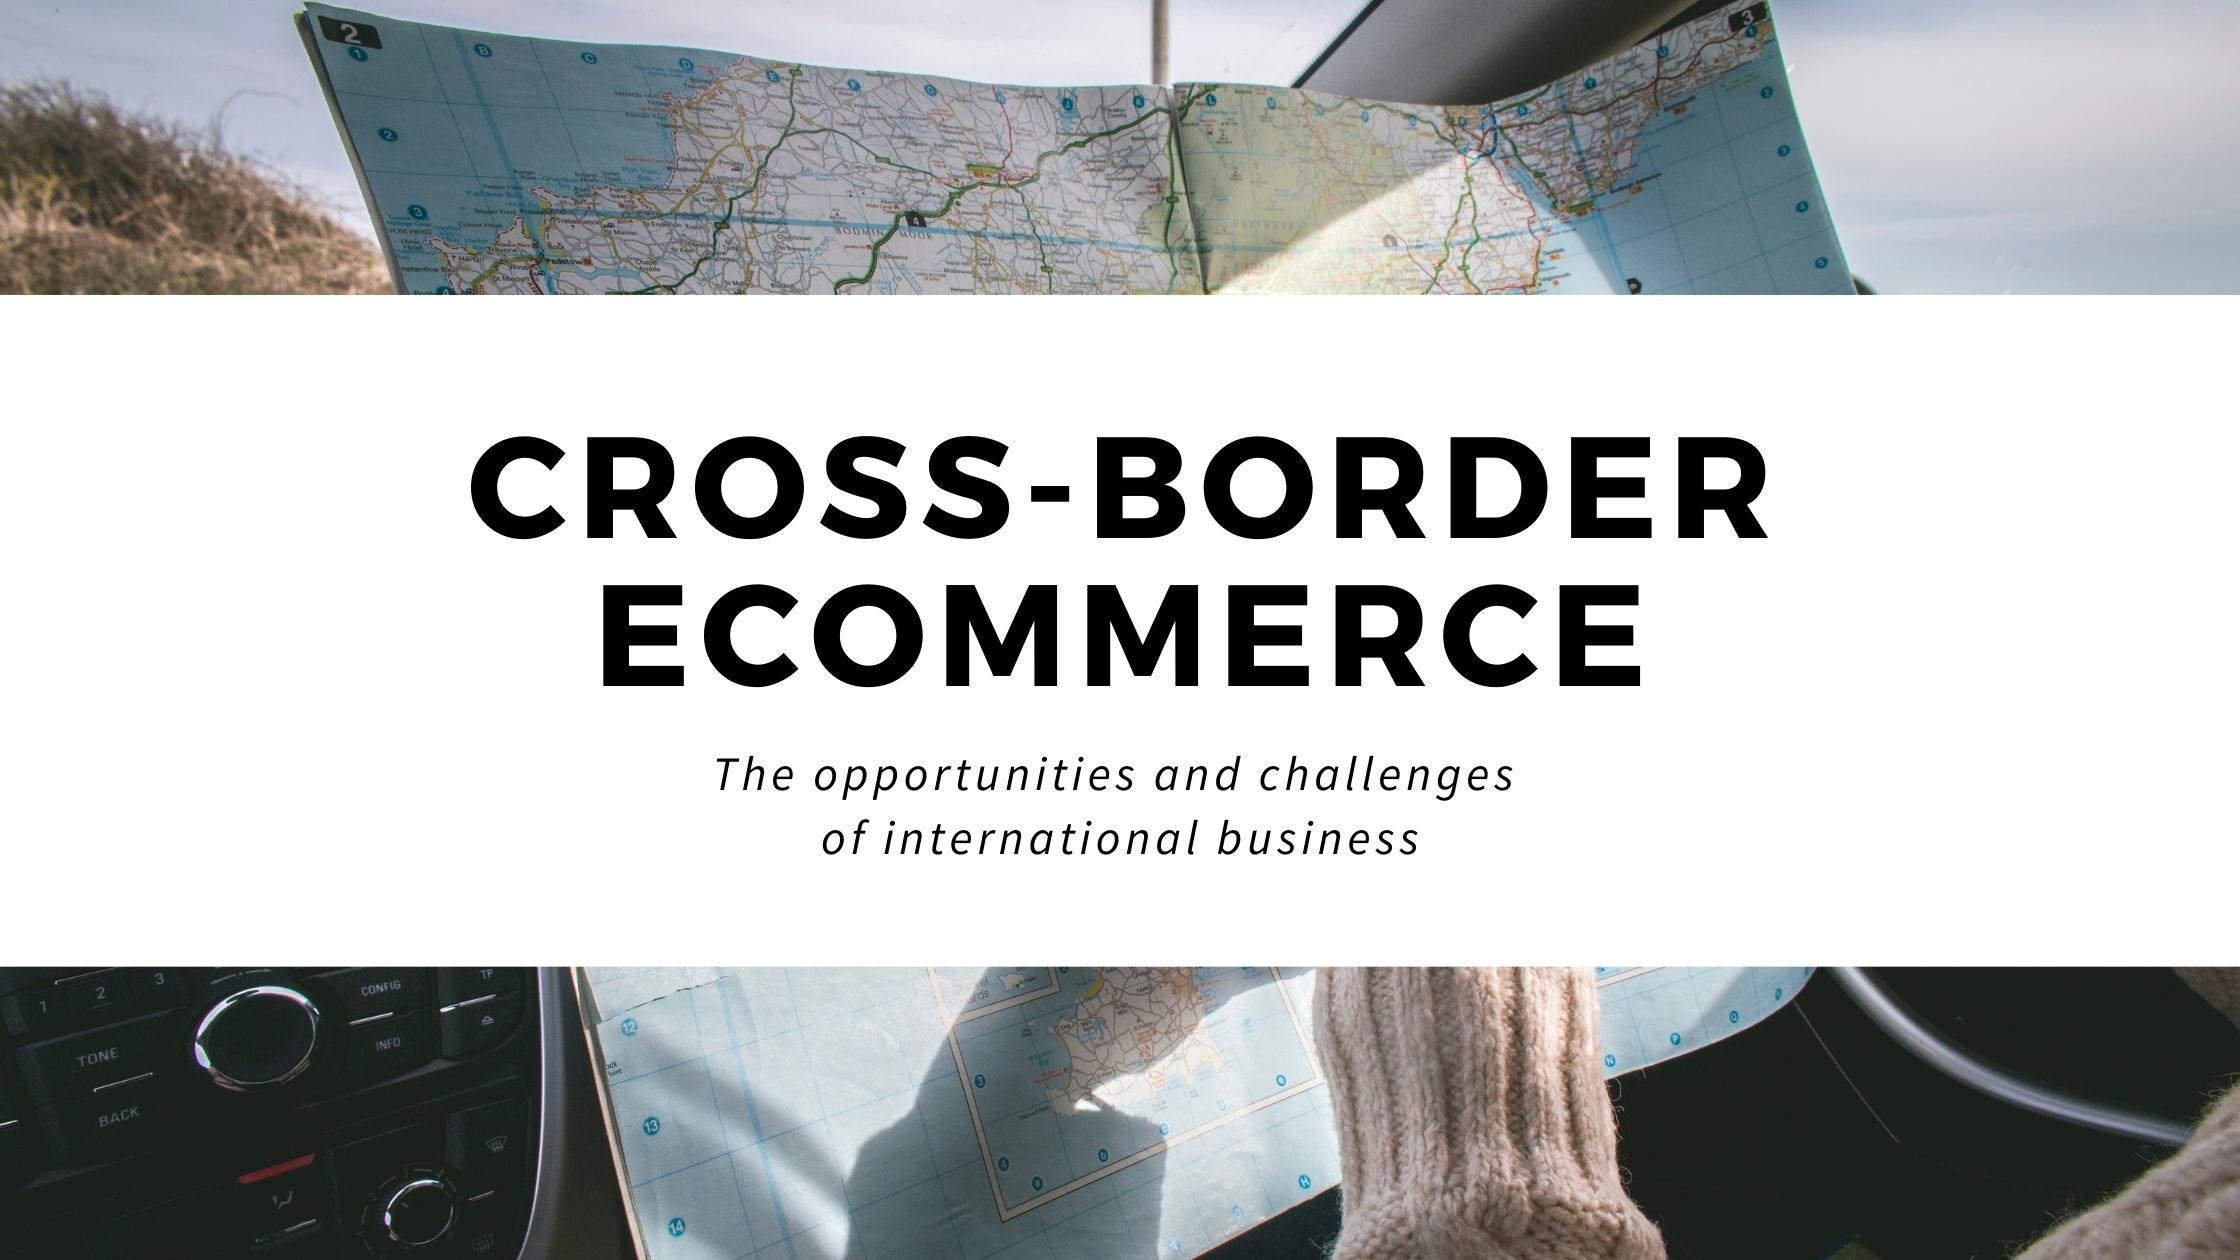 Cross-Border and International Ecommerce - The Opportunities and Challenges